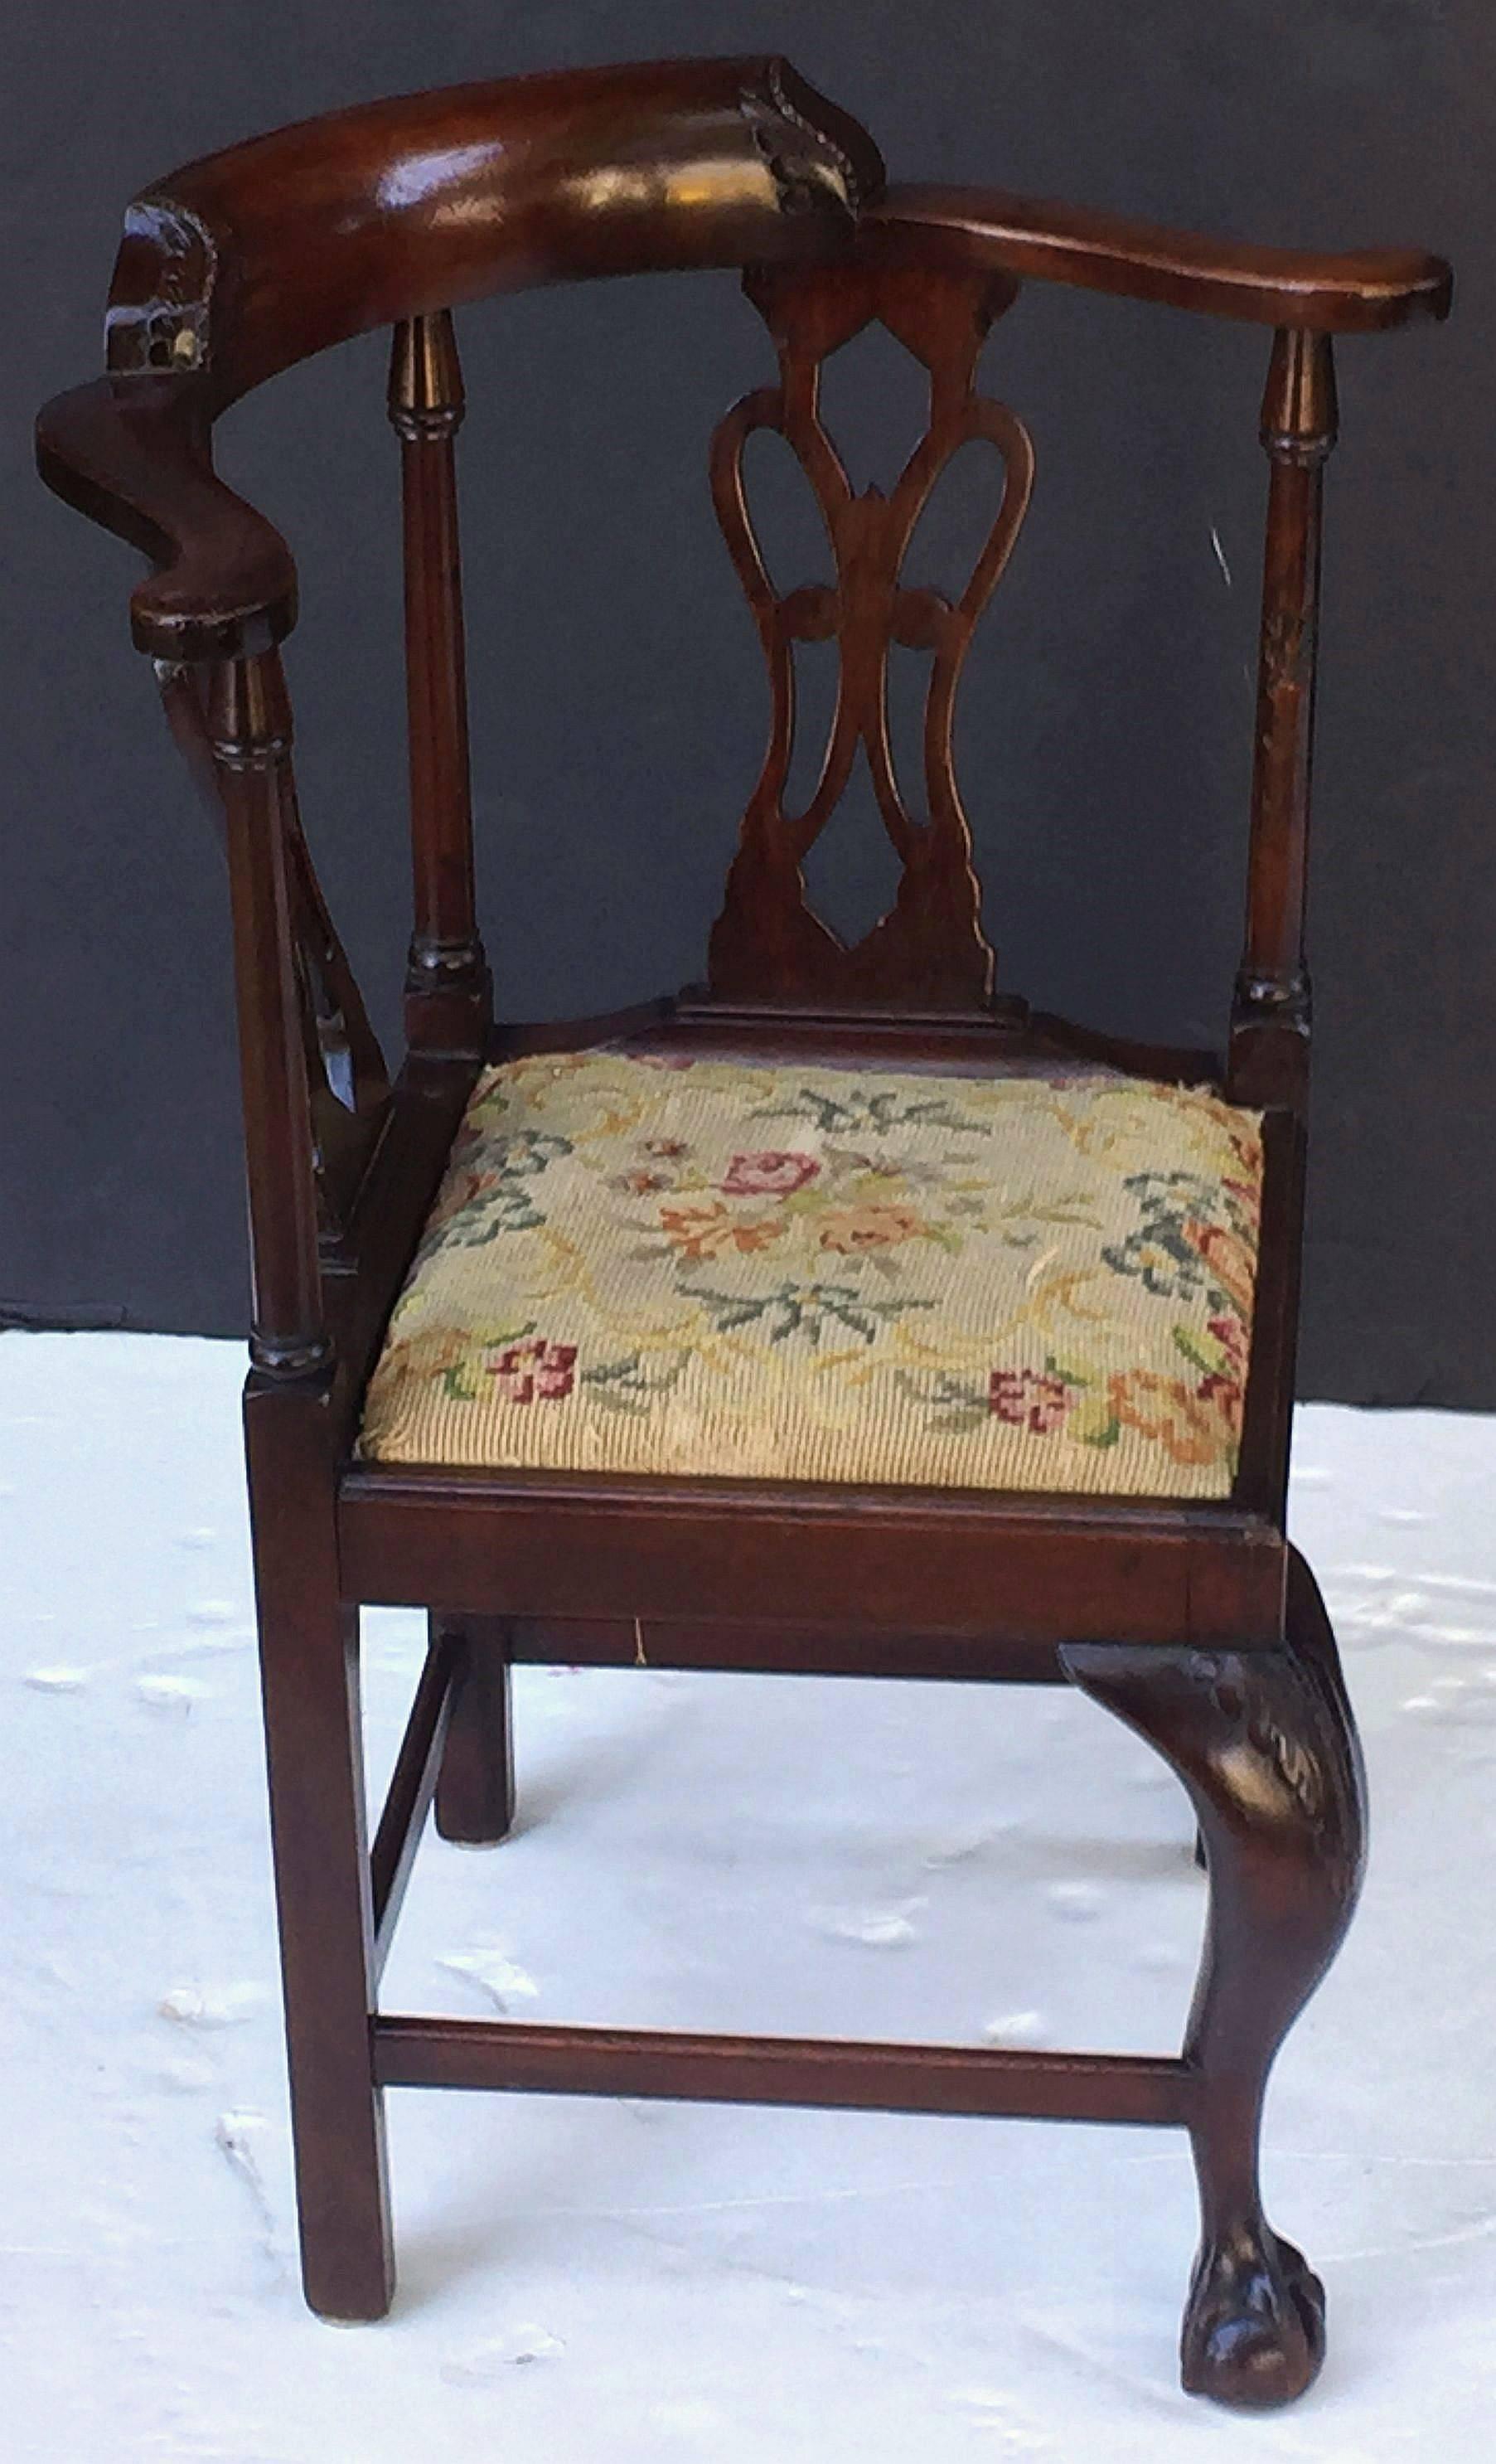 A fine English child's corner chair of mahogany with drop-in needlepoint seat, featuring the working design of an adult-sized chair but at a smaller scale. Handsomely moulded top rail with continuous serpentine arm mounted to a Classic square